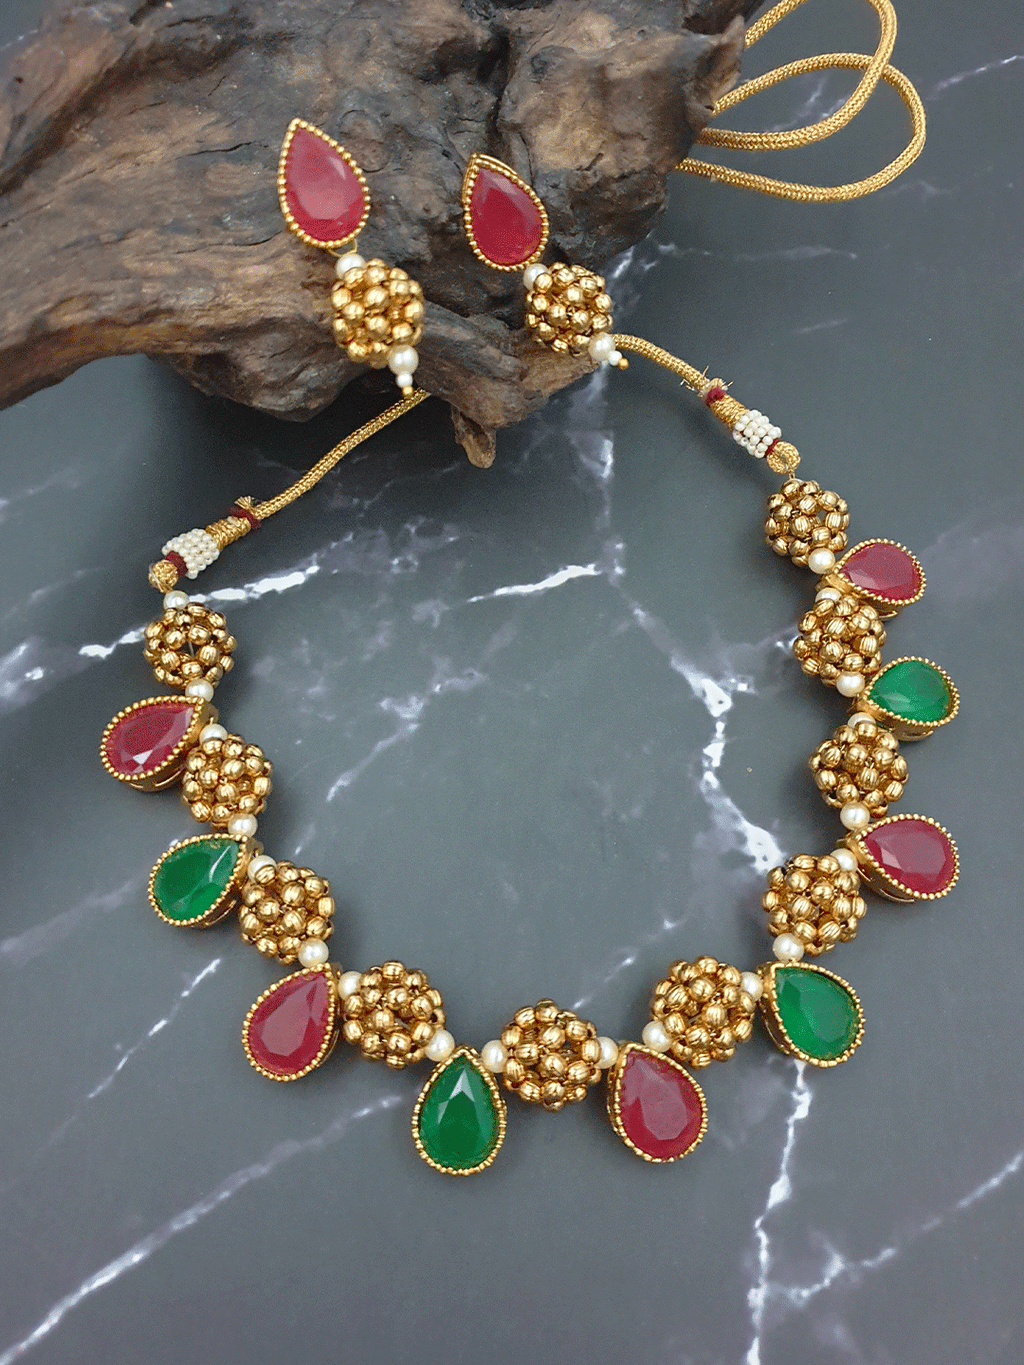 Antique beads and multi stone necklace with earrings  - VCCNE5472